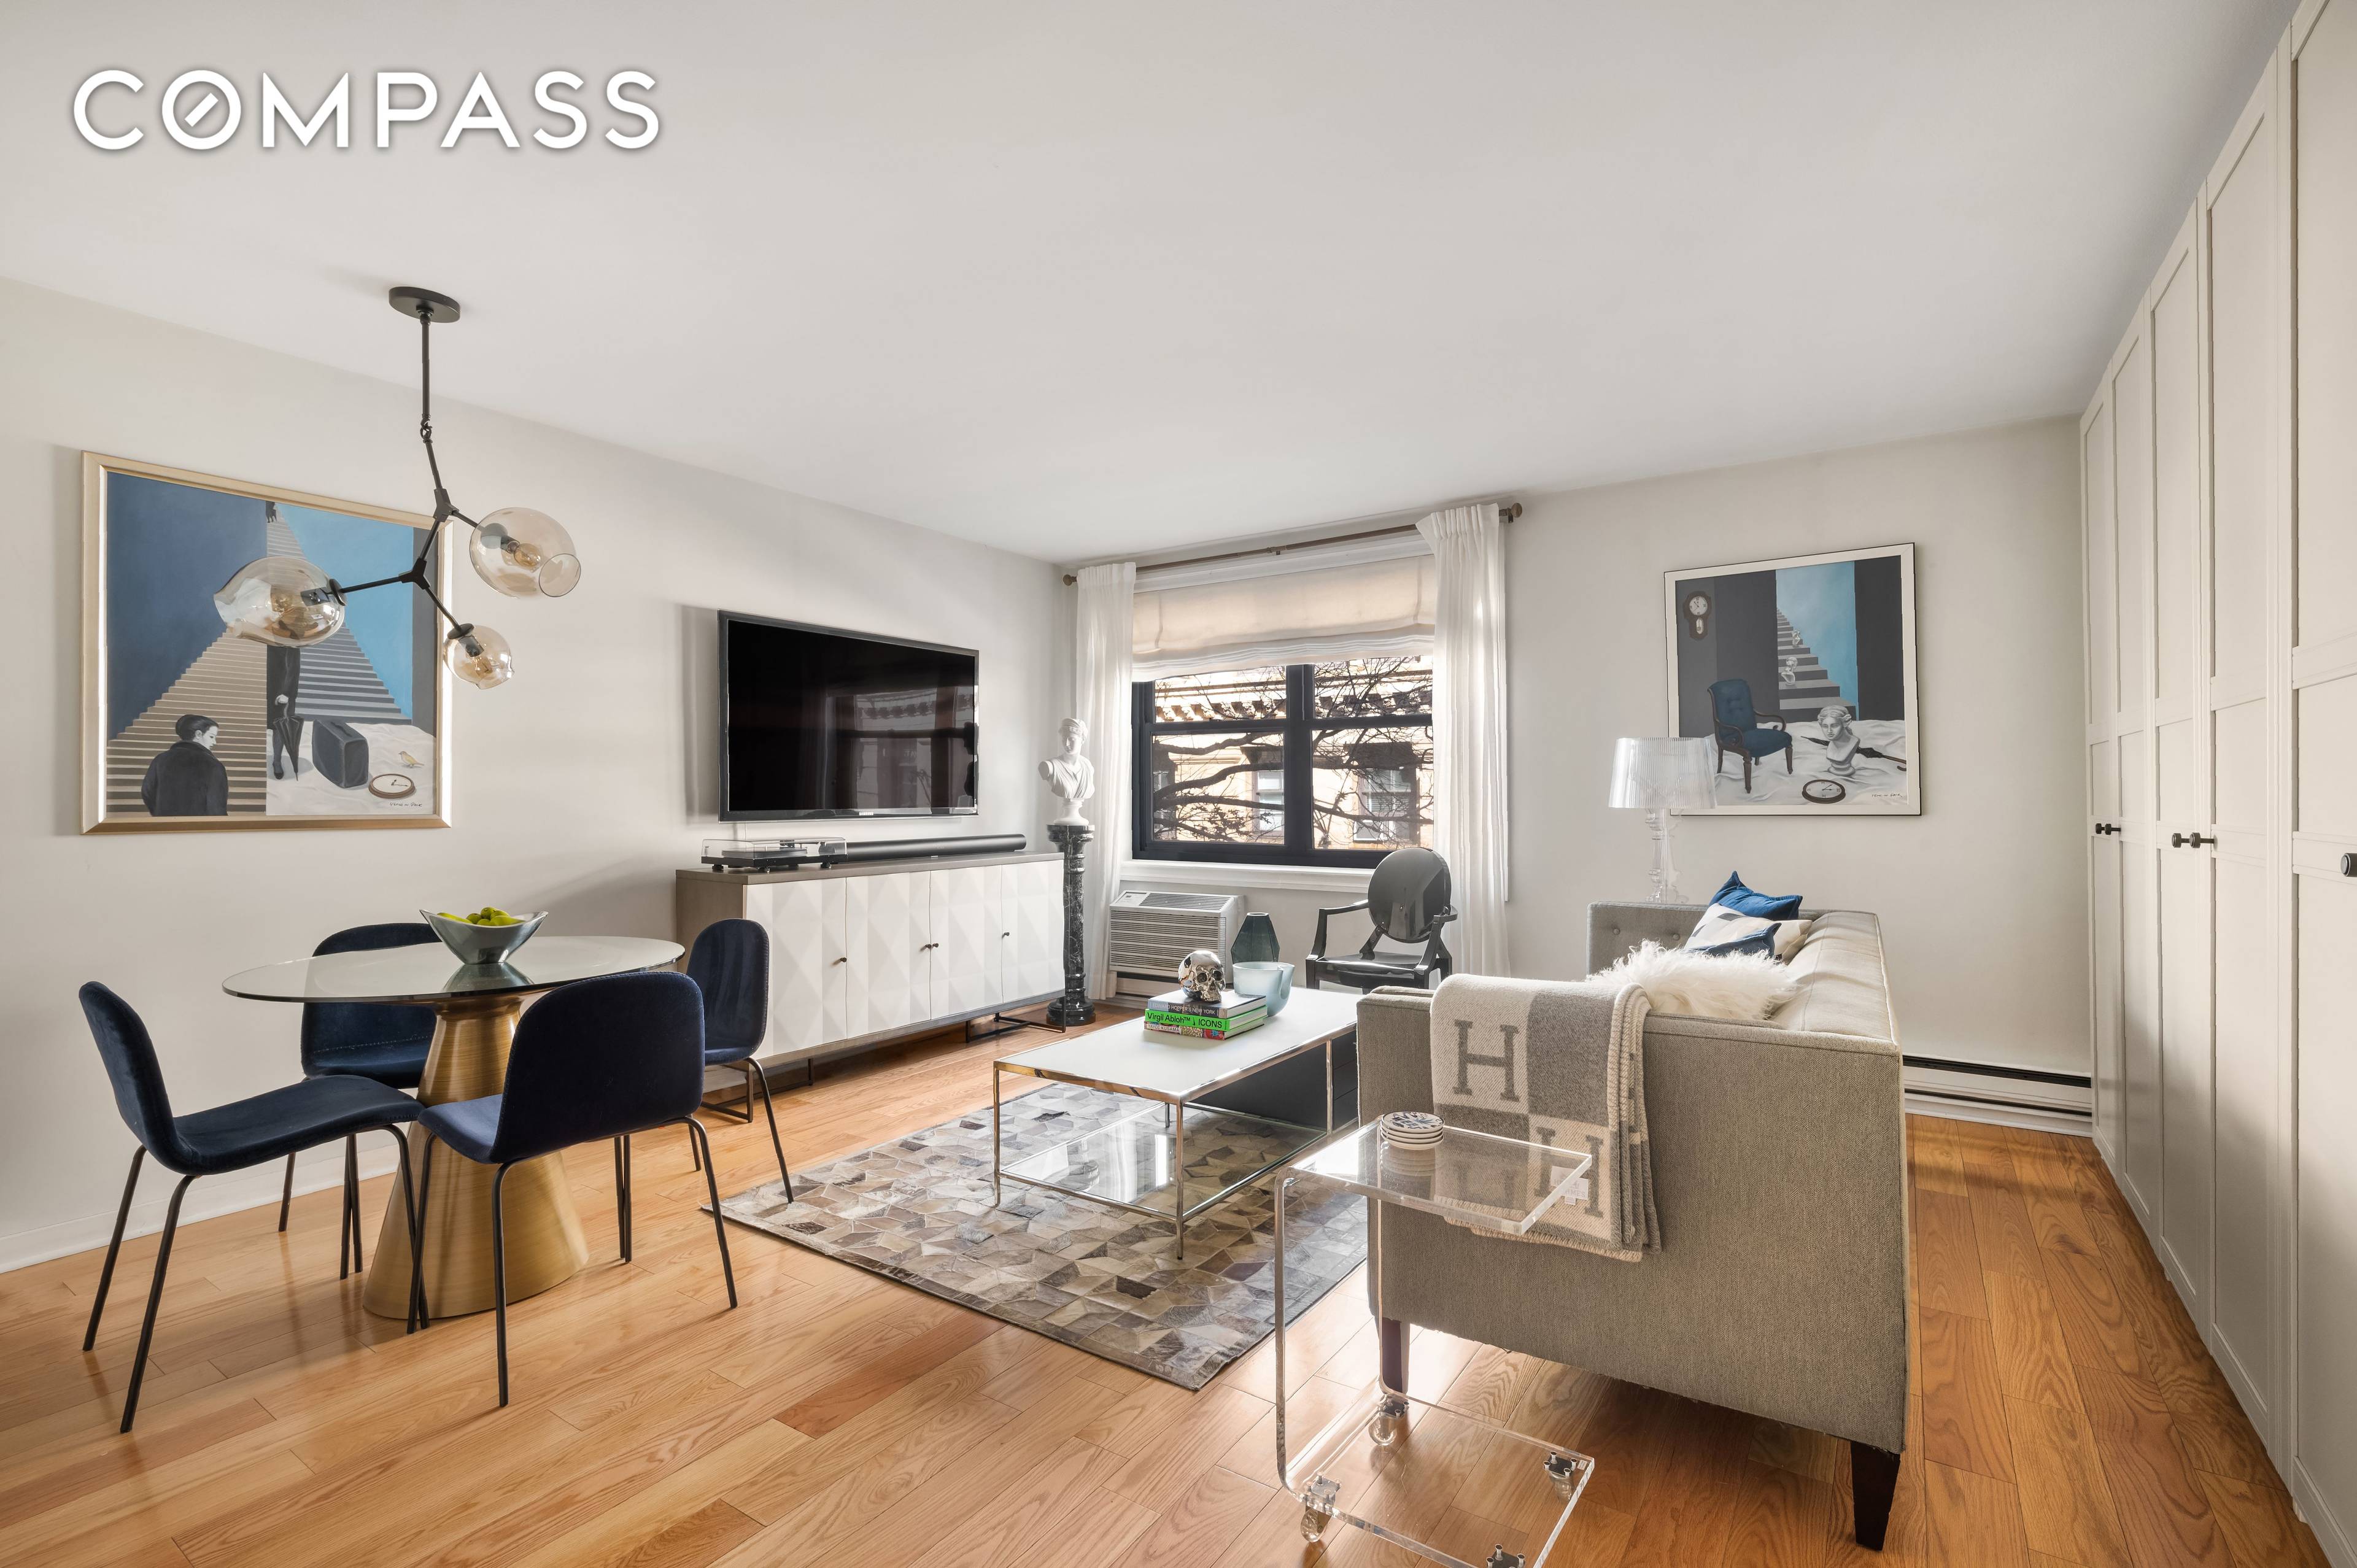 Welcome to your dream home in the idyllic West Village, located on charming Bank Street and just a block away from breathtaking Hudson River Park.